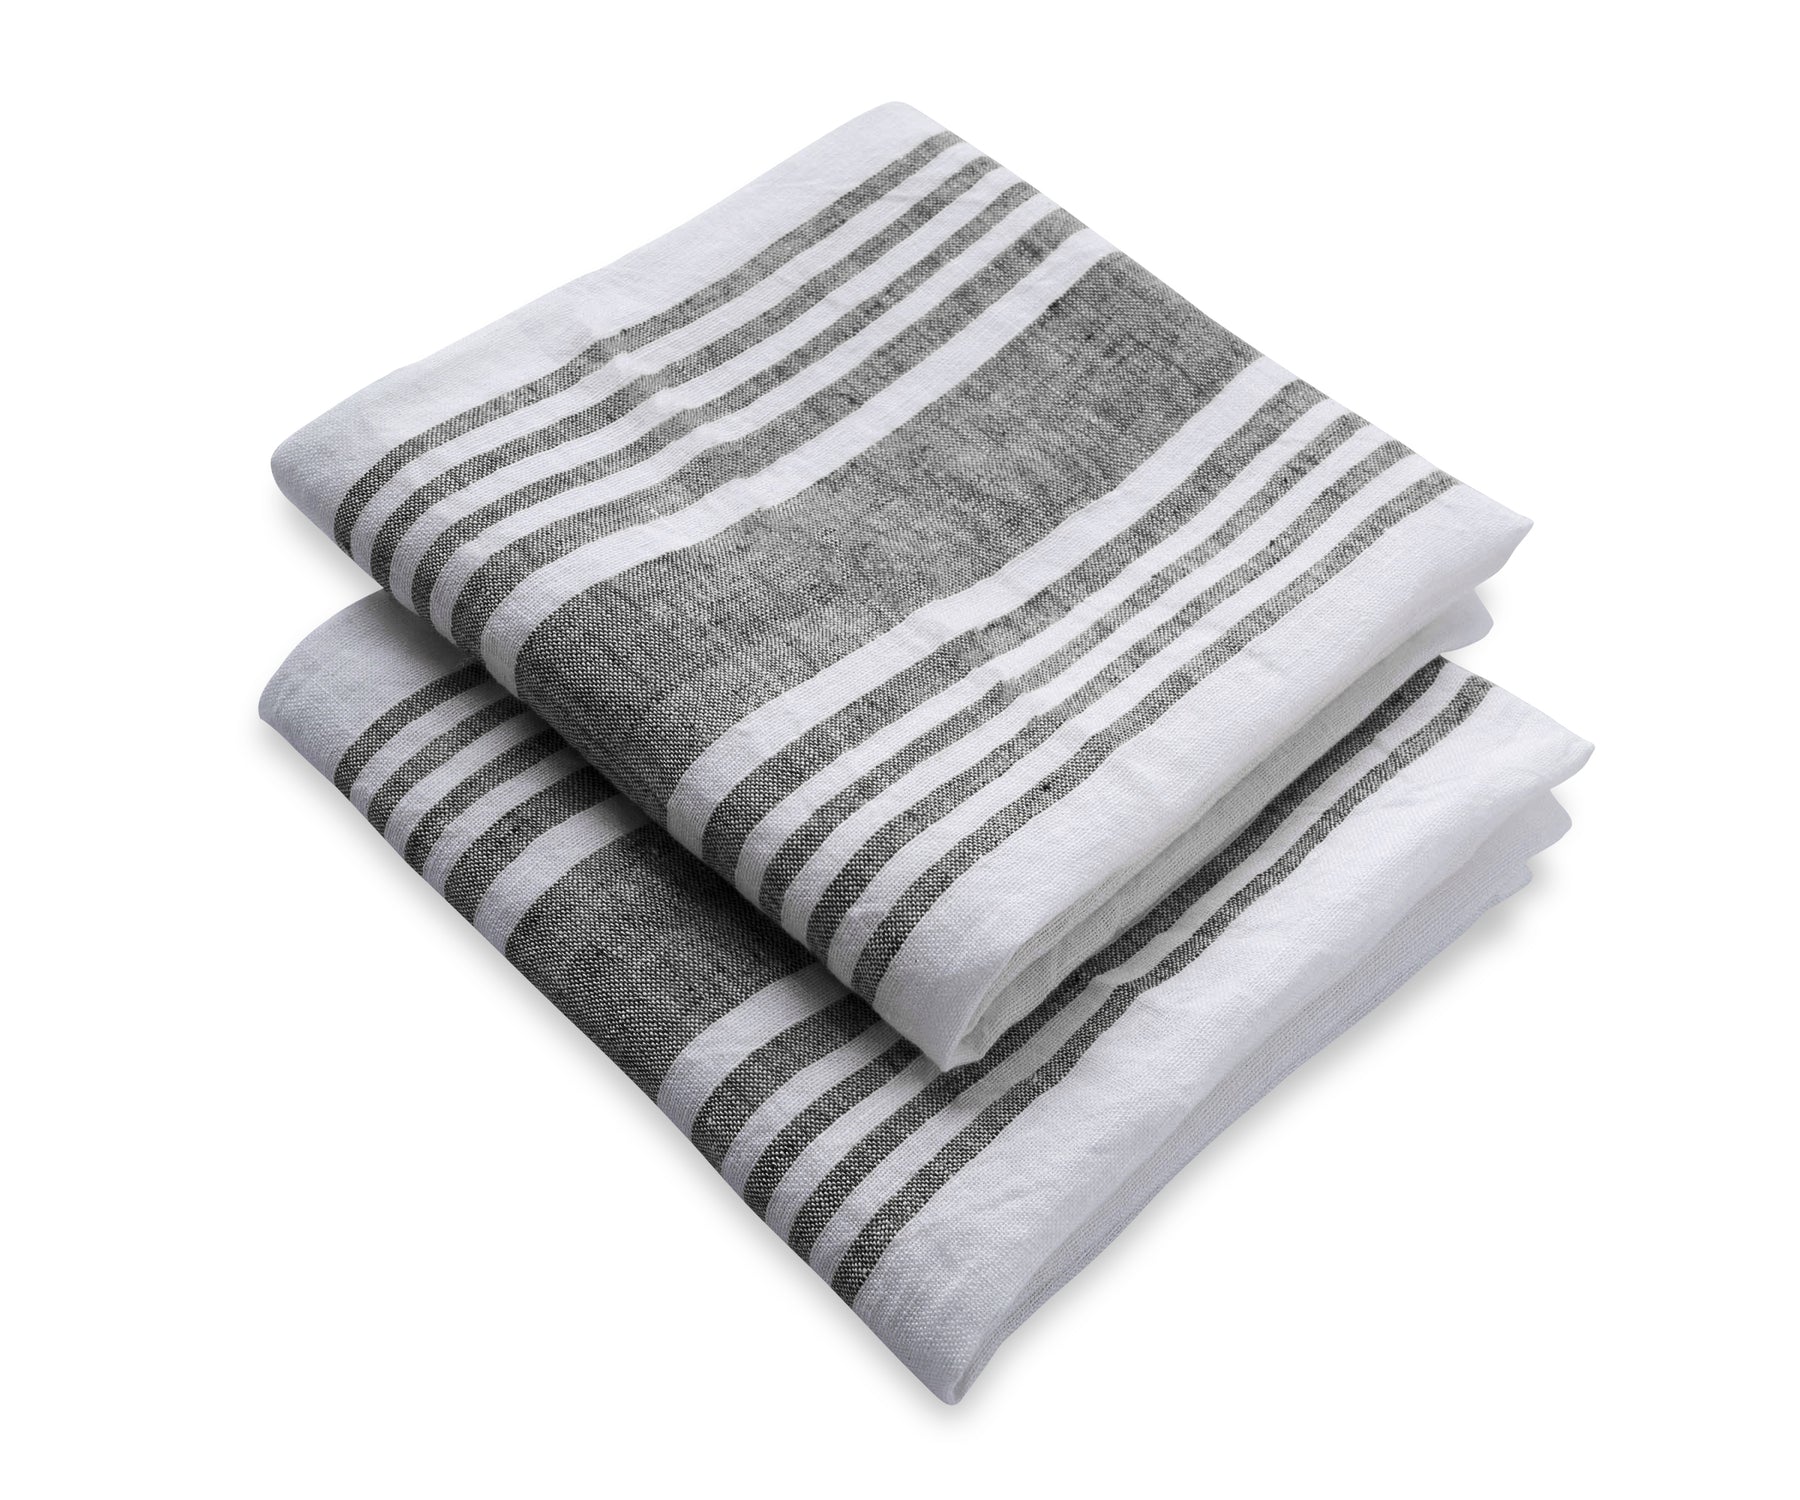 Thick Linen Tea Towels in Various Patterns, Handmade Kitchen